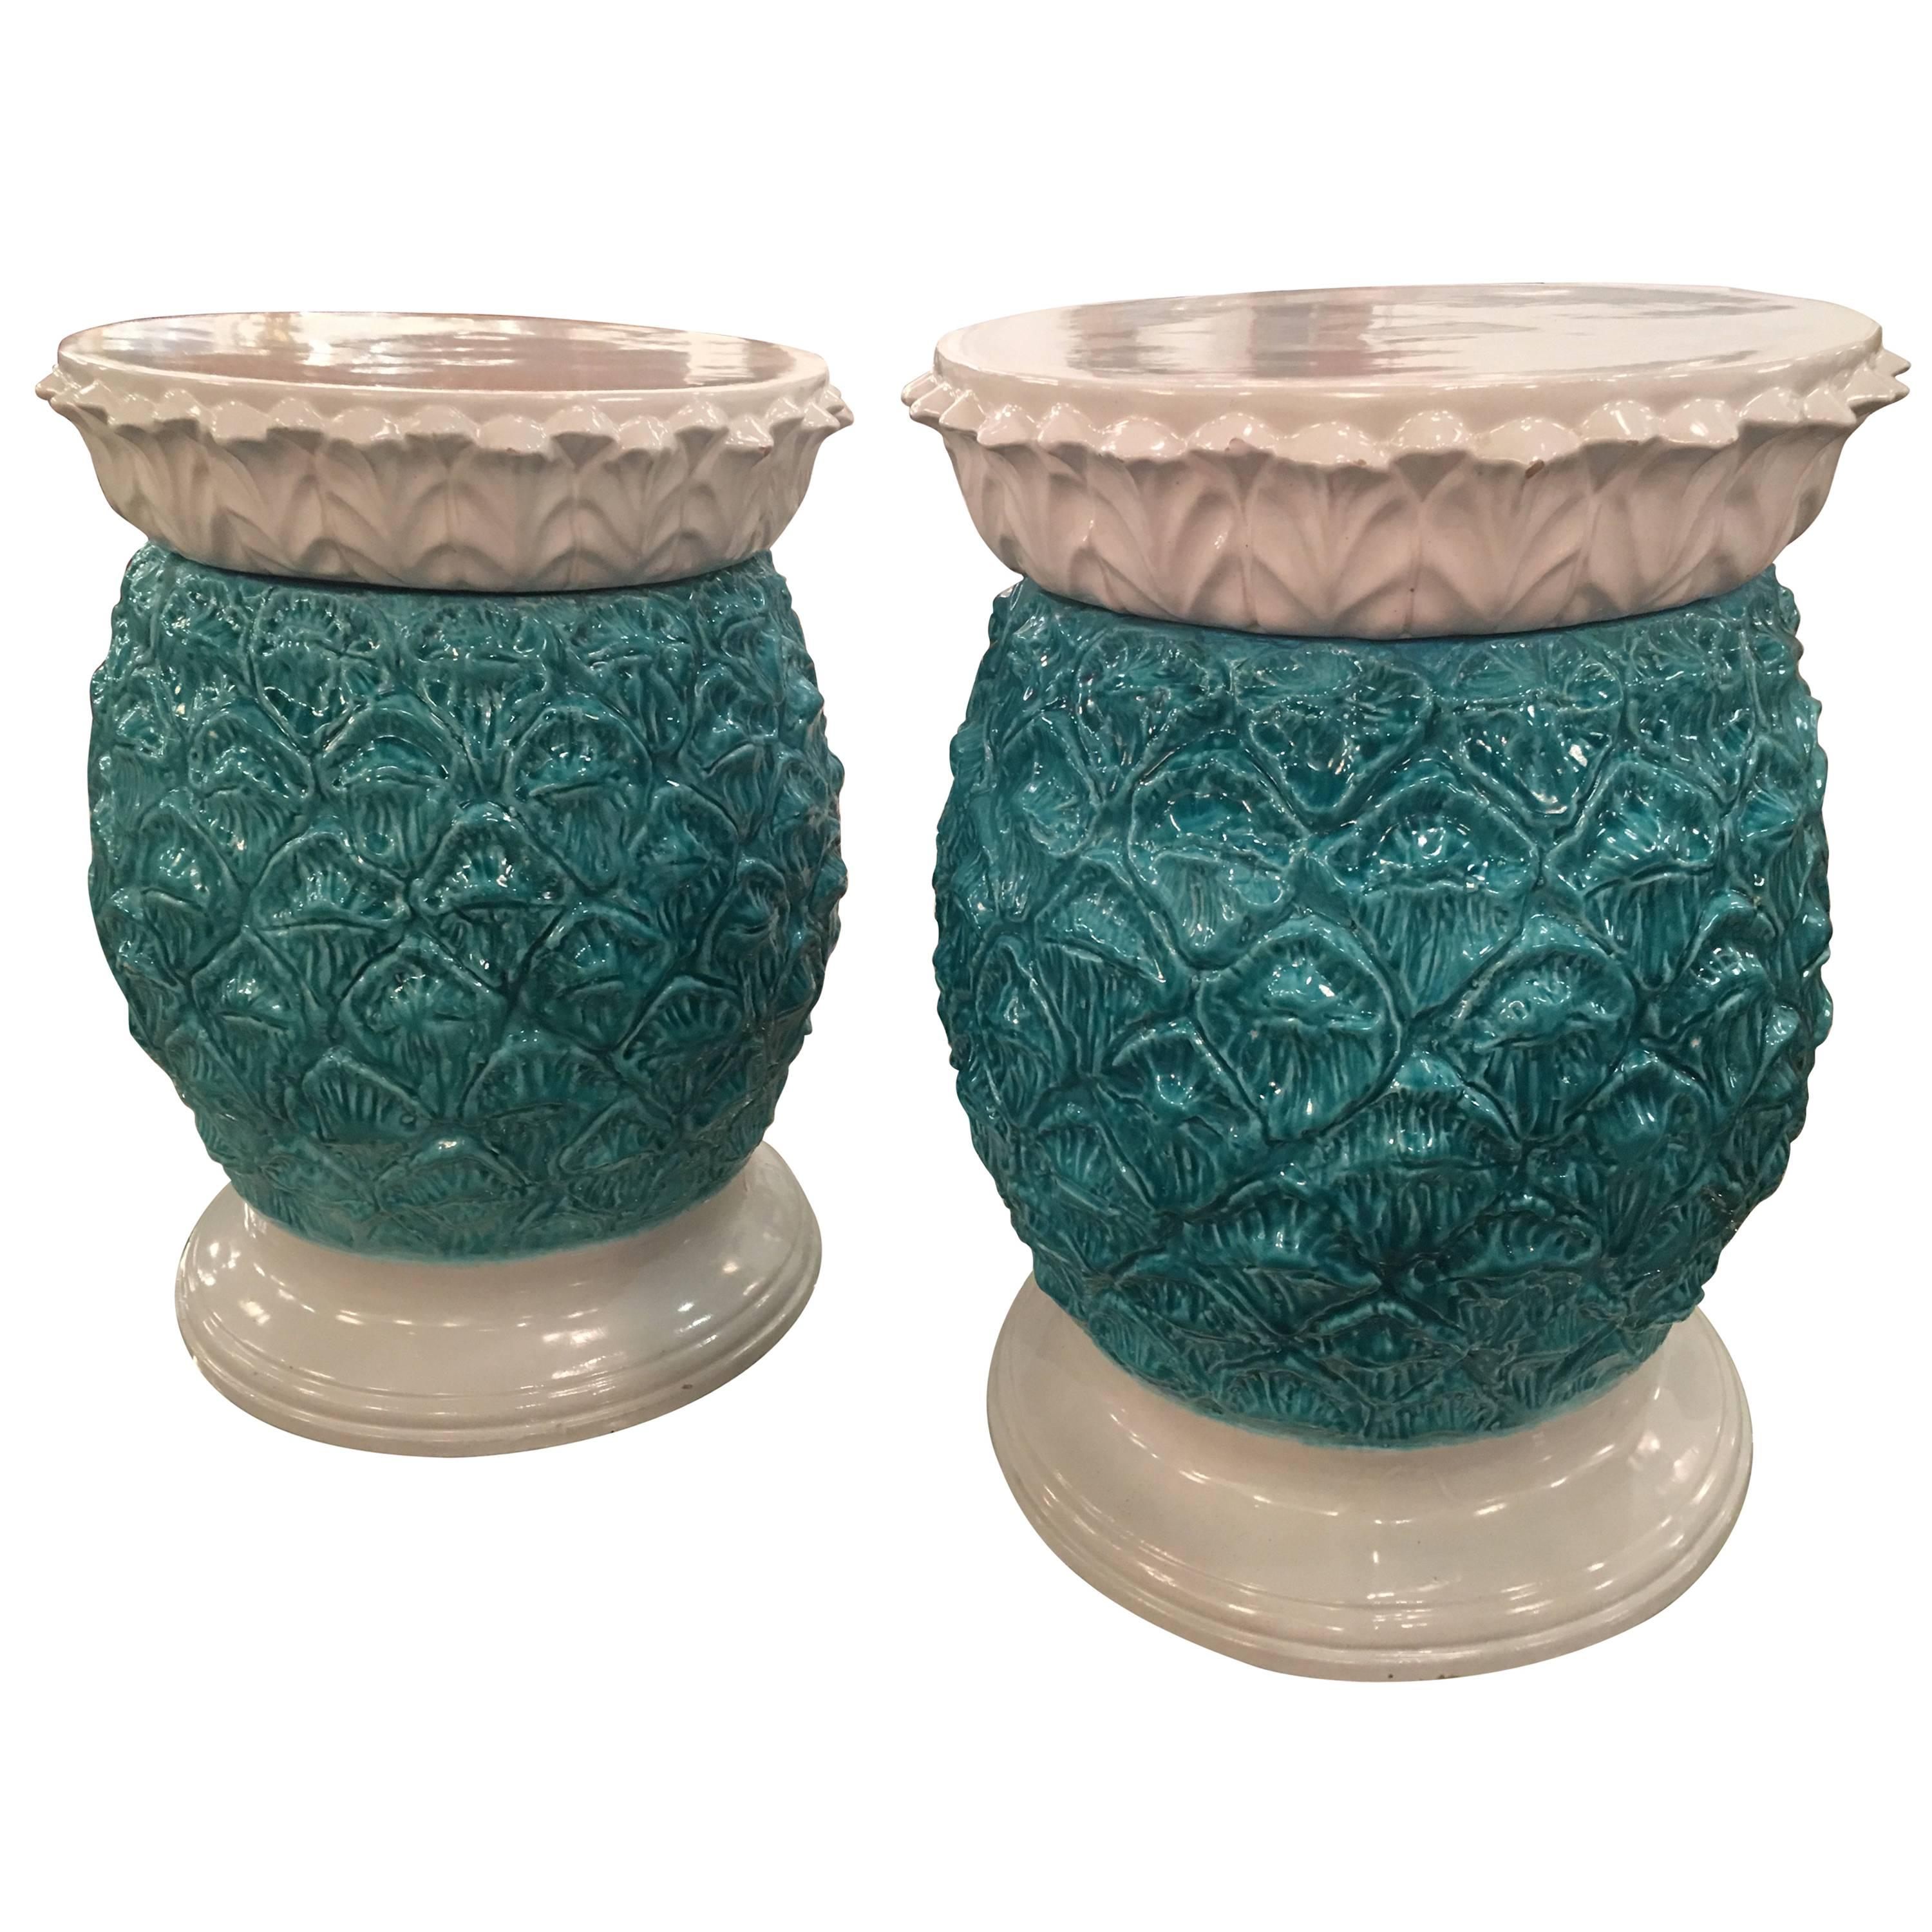 Glazed Terra Cora Pineapple Garden Stools Stands Italian Pair of End Side Tables